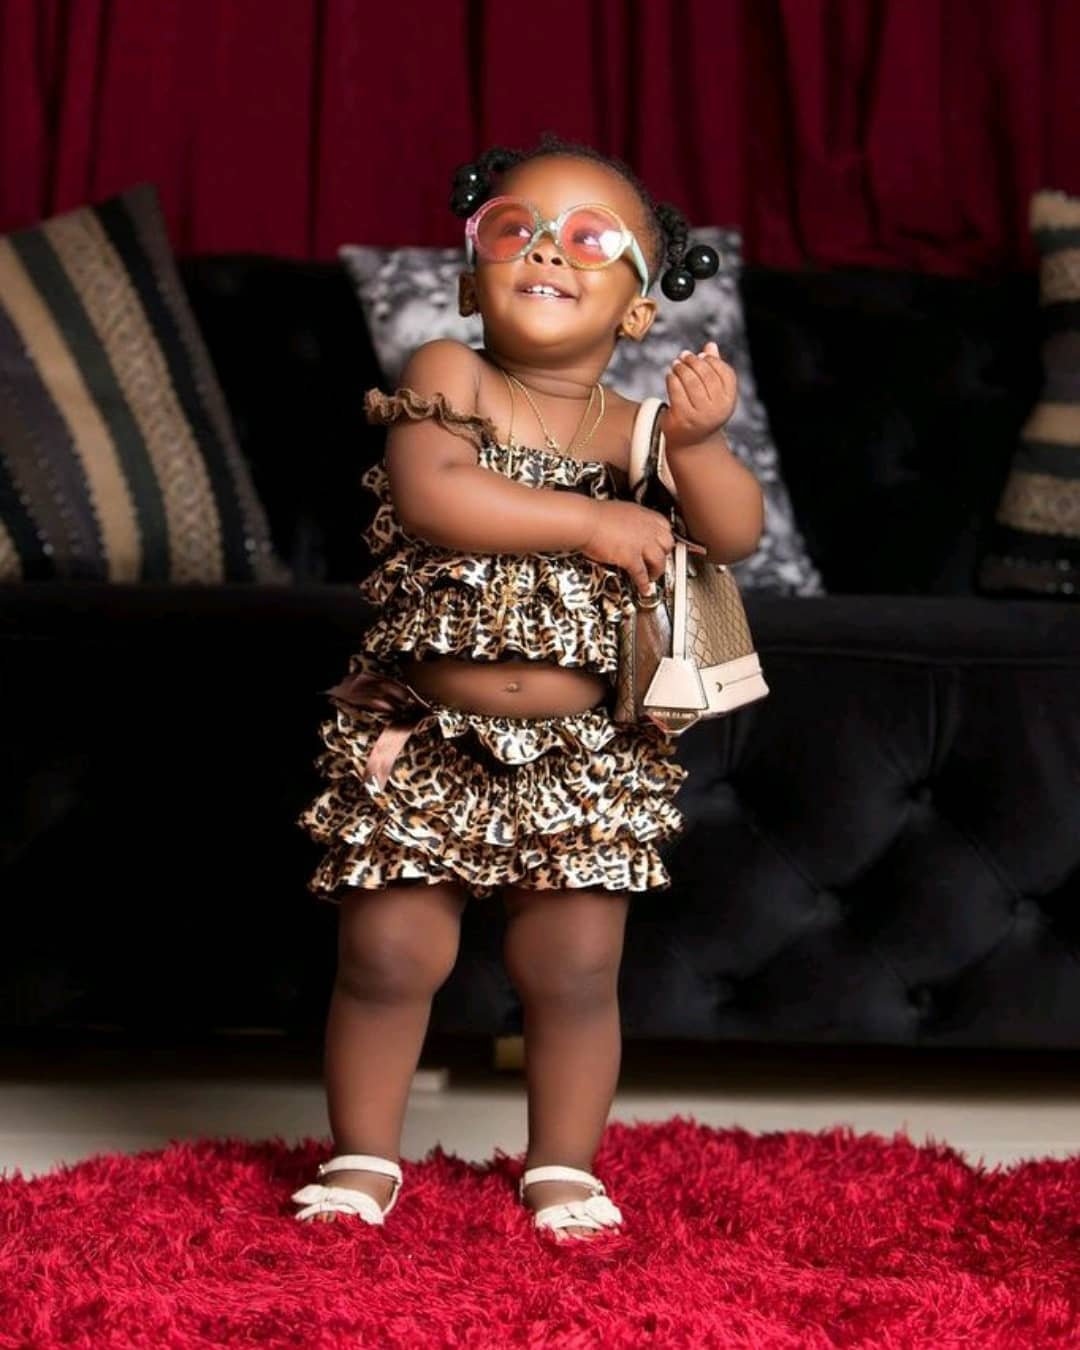 Kid fashionista: Baby Maxin poses with her cute pink handbag in latest photo